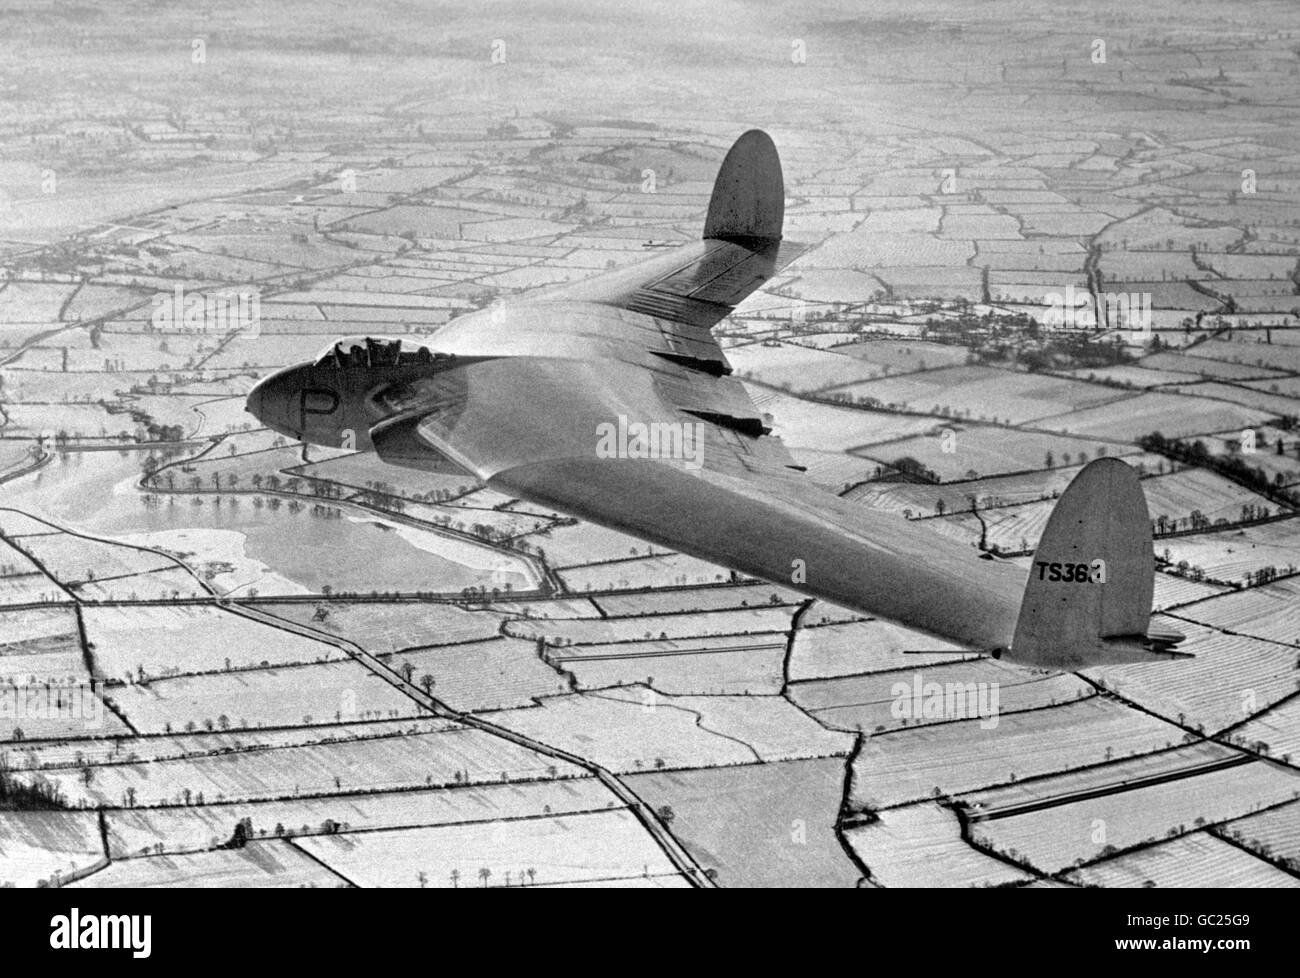 An Armstrong Whitworth A.W.52G experimental flying wing glider. Designed to be half-size prototype for the jet powered version, this was photographed during its first ever test flight. Stock Photo